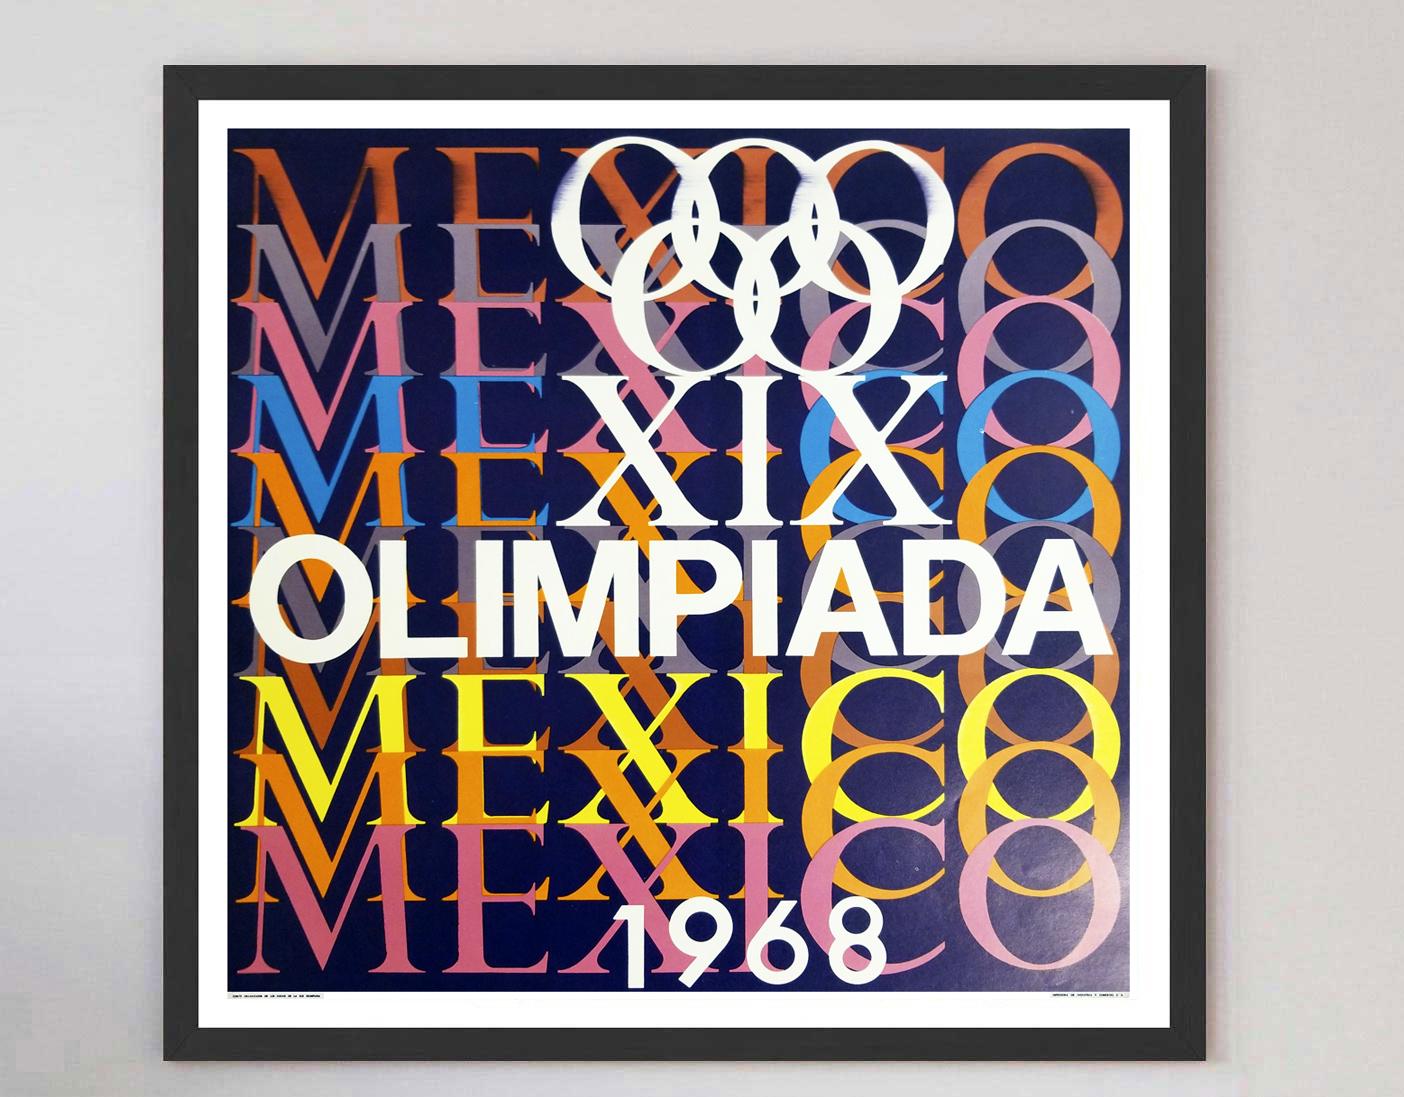 Mexican 1968 Mexico 1968 Olympic Games Original Vintage Poster